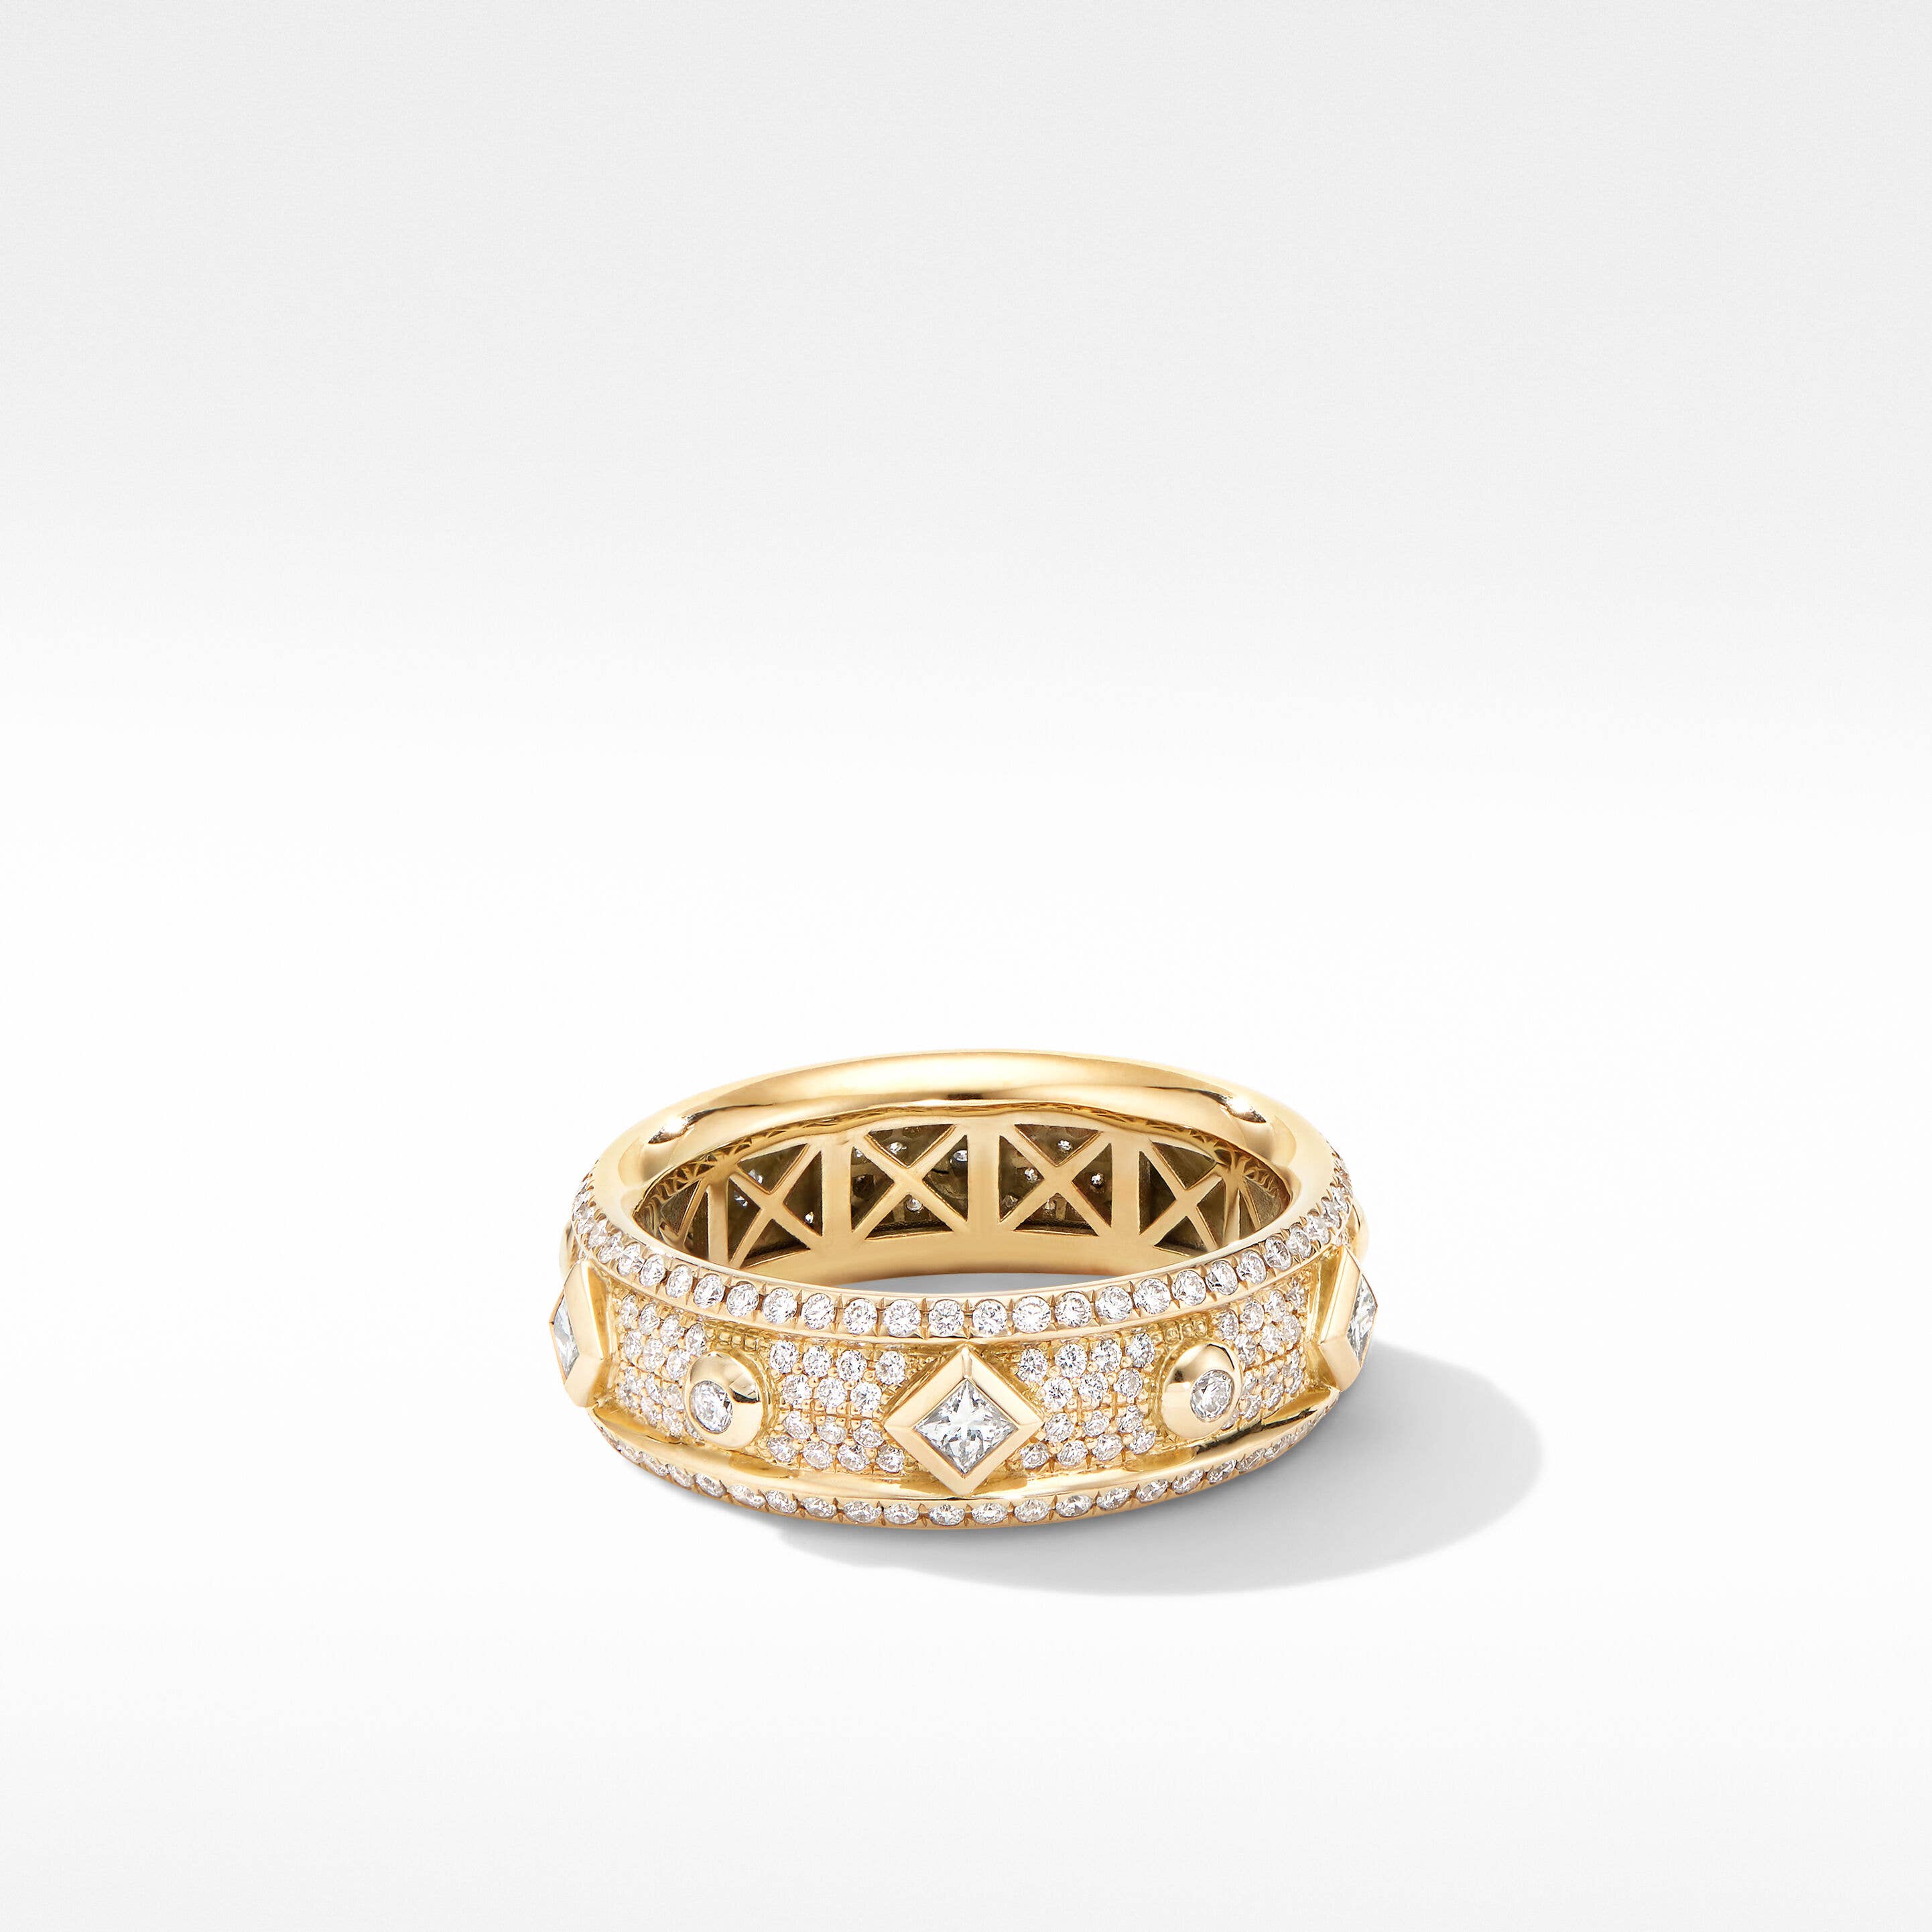 Modern Renaissance Band Ring in 18K Yellow Gold with Full Pavé, 6.6mm